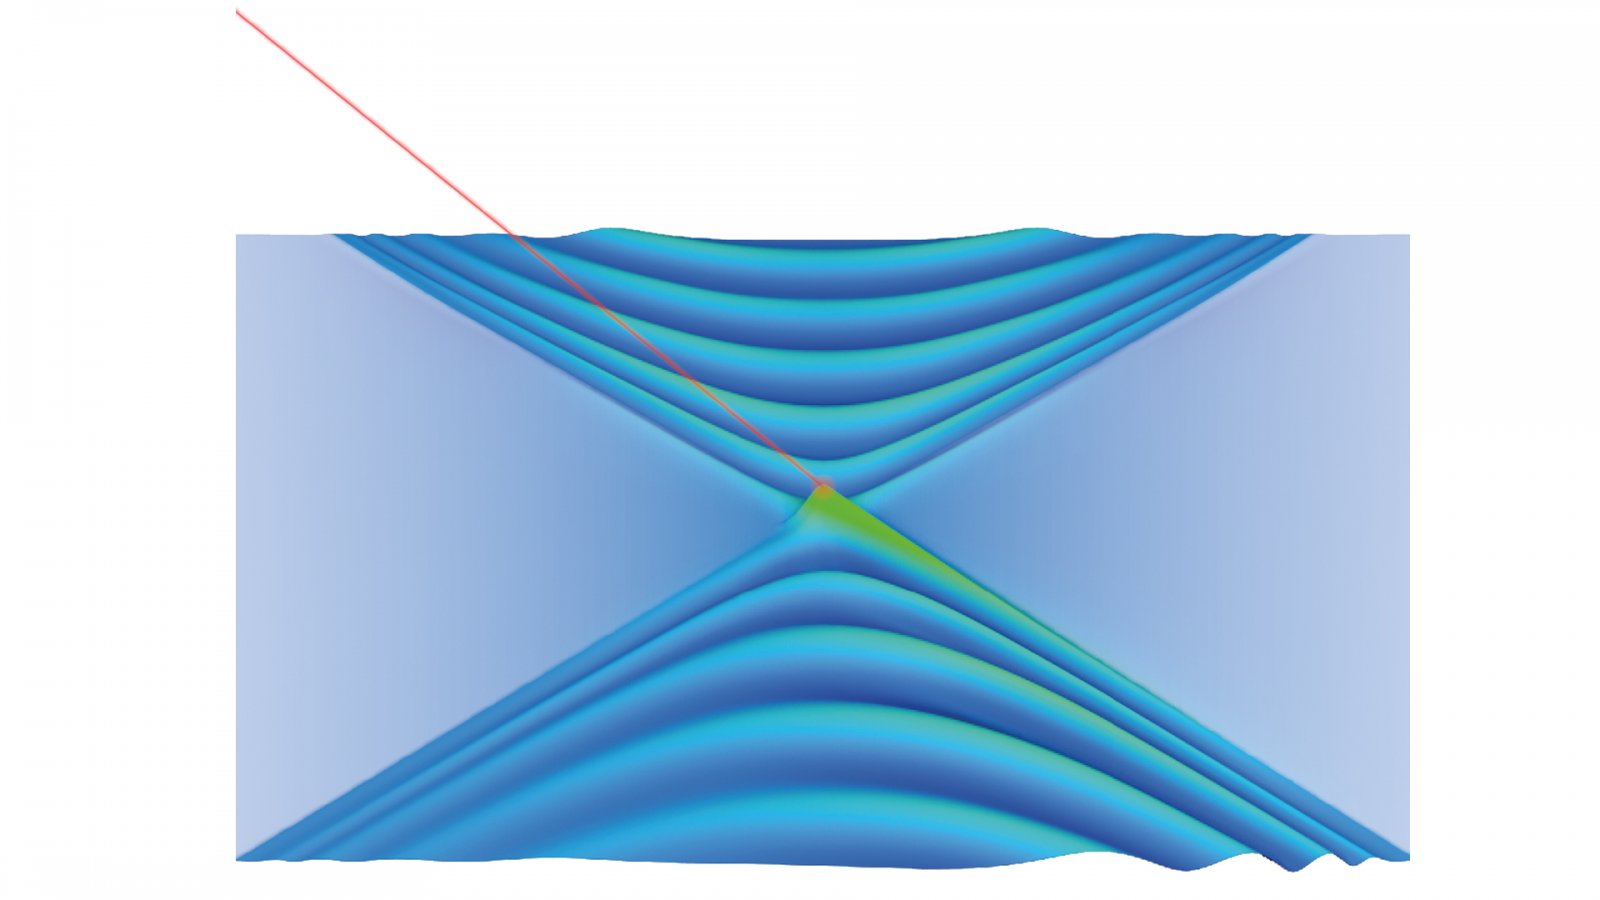 Hyperbolic shear polaritons are coupled light-matter waves which were discovered to exist at the surface of monoclinic crystals. Due to the low crystal symmetry, these waves are not mirror-symmetric. (Credit: FHI / Wernerwerke)